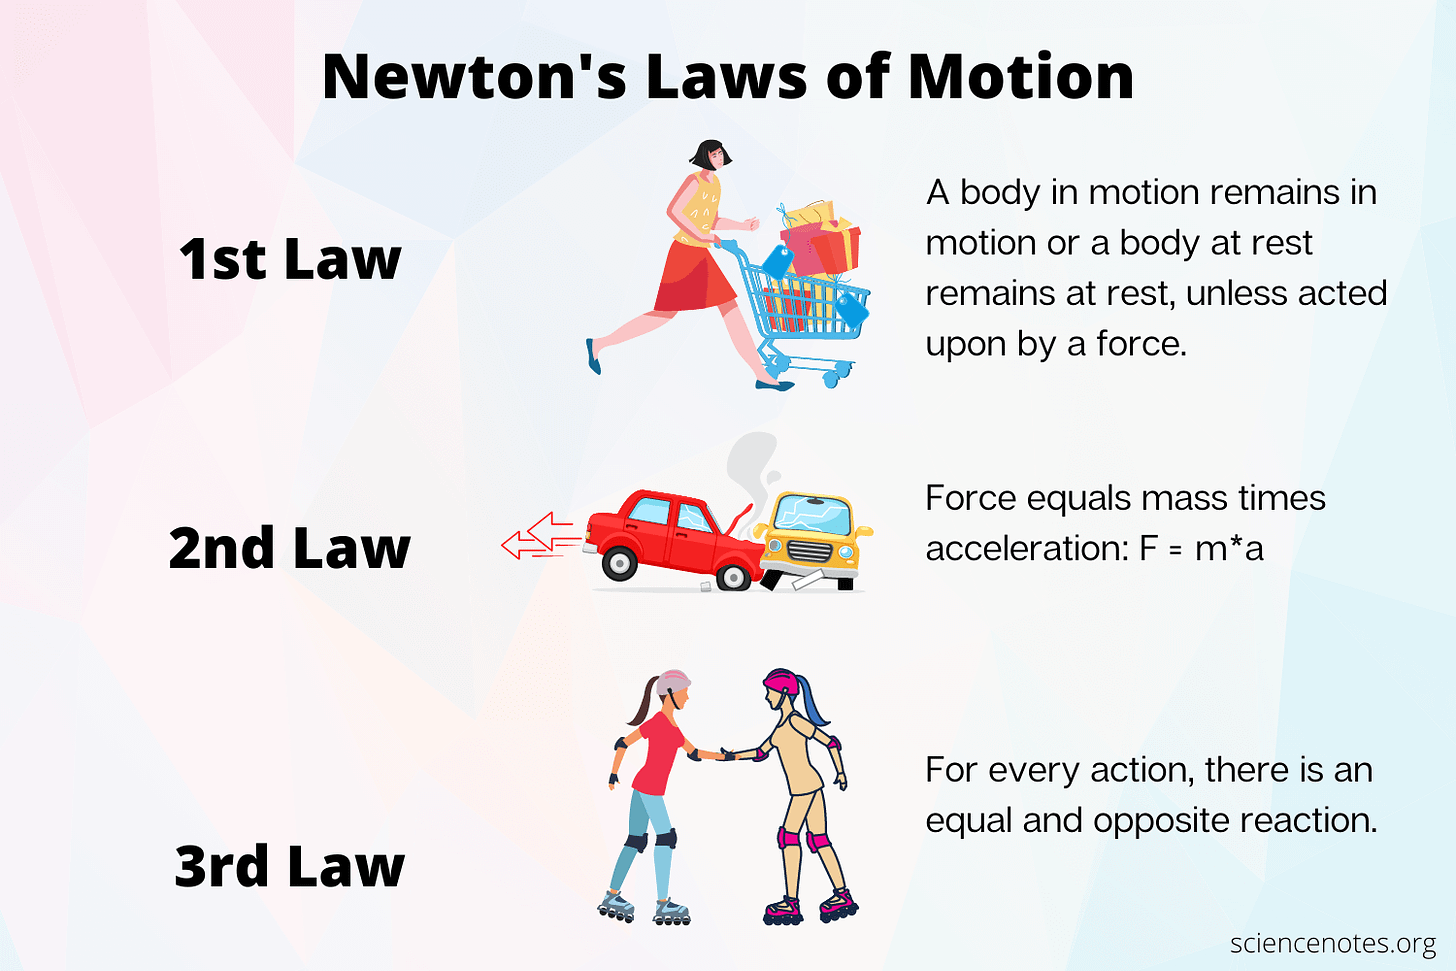 Newton's Laws of Motion